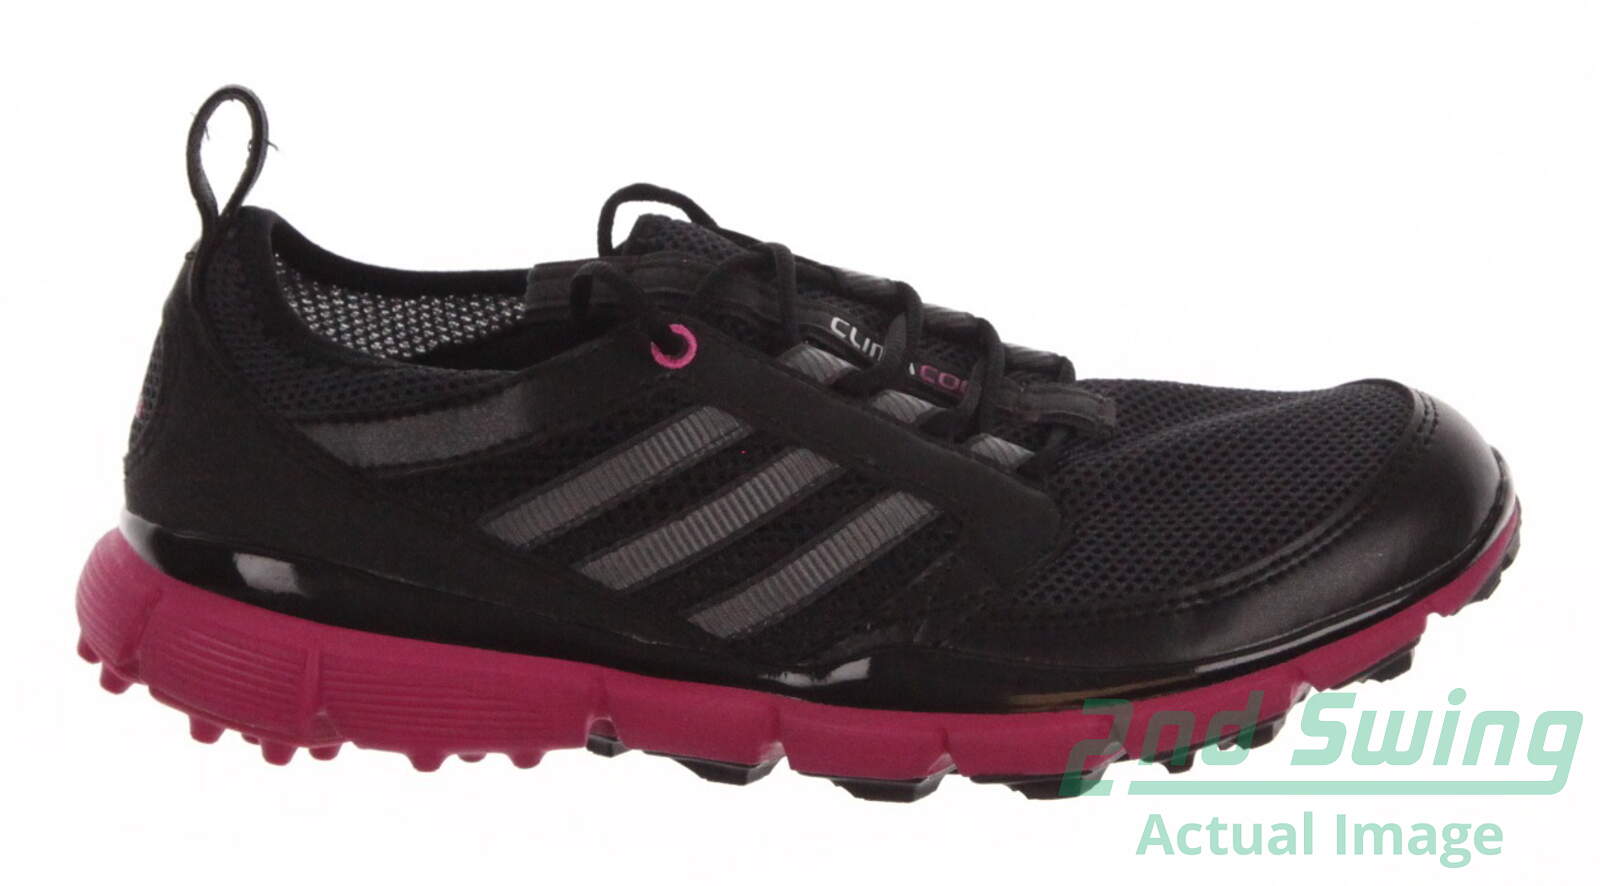 adidas climacool womens golf shoes